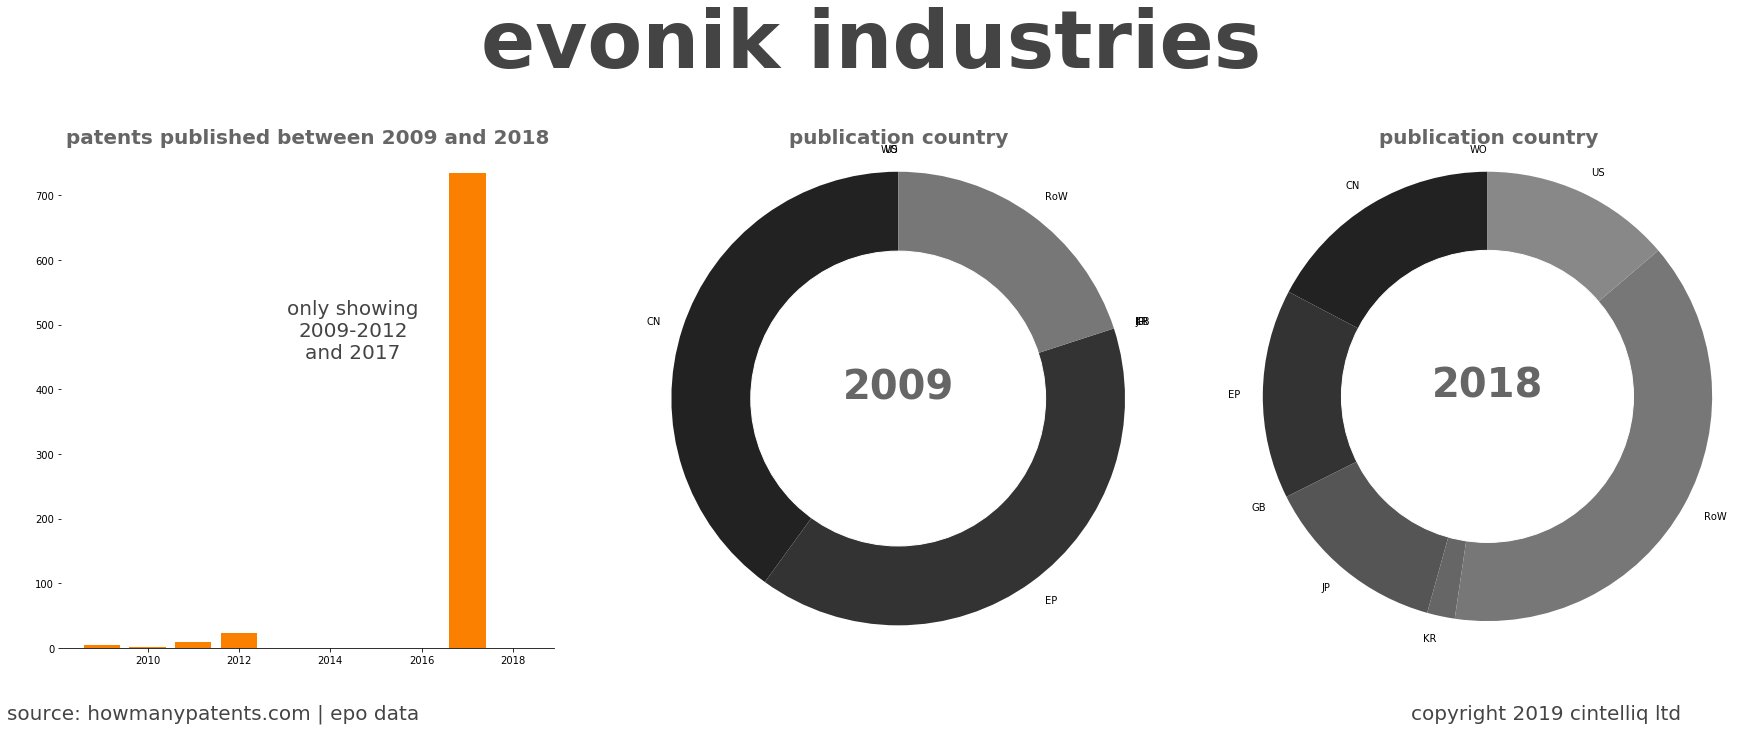 summary of patents for Evonik Industries